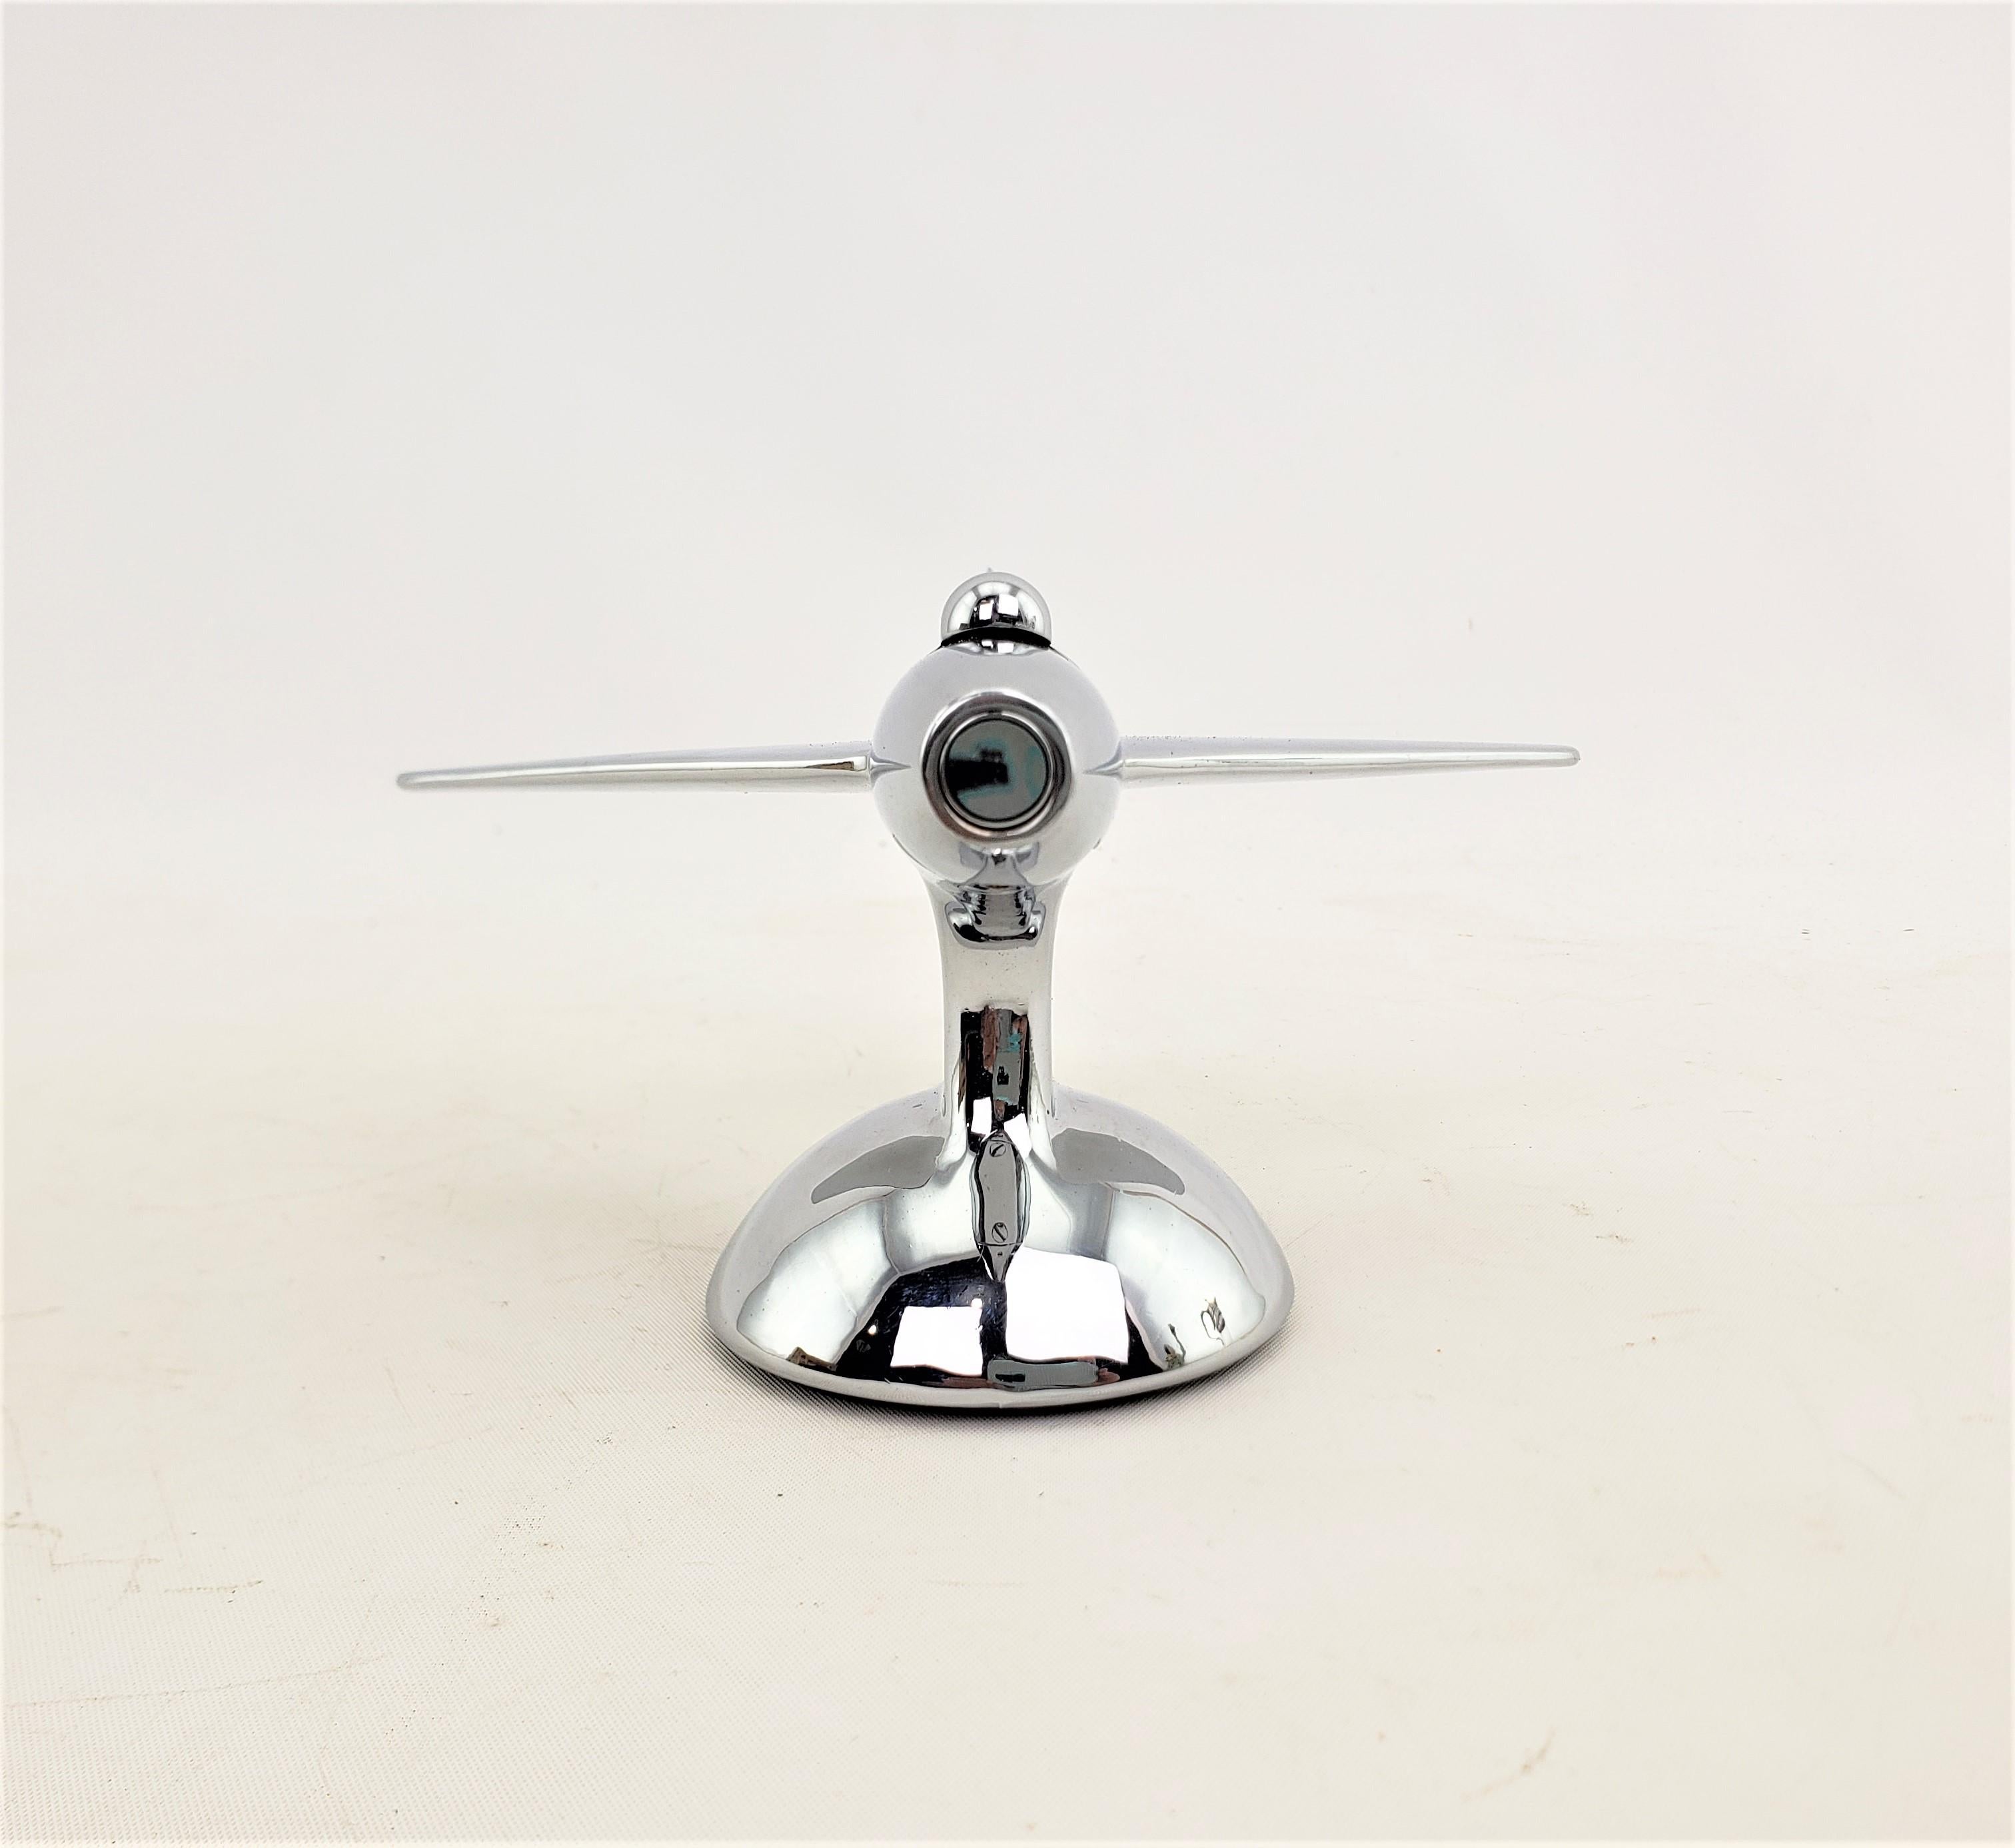 Dunhill Mid-Century Modern Chrome Stylized Sabre Jet Airplane Table Lighter In Good Condition For Sale In Hamilton, Ontario